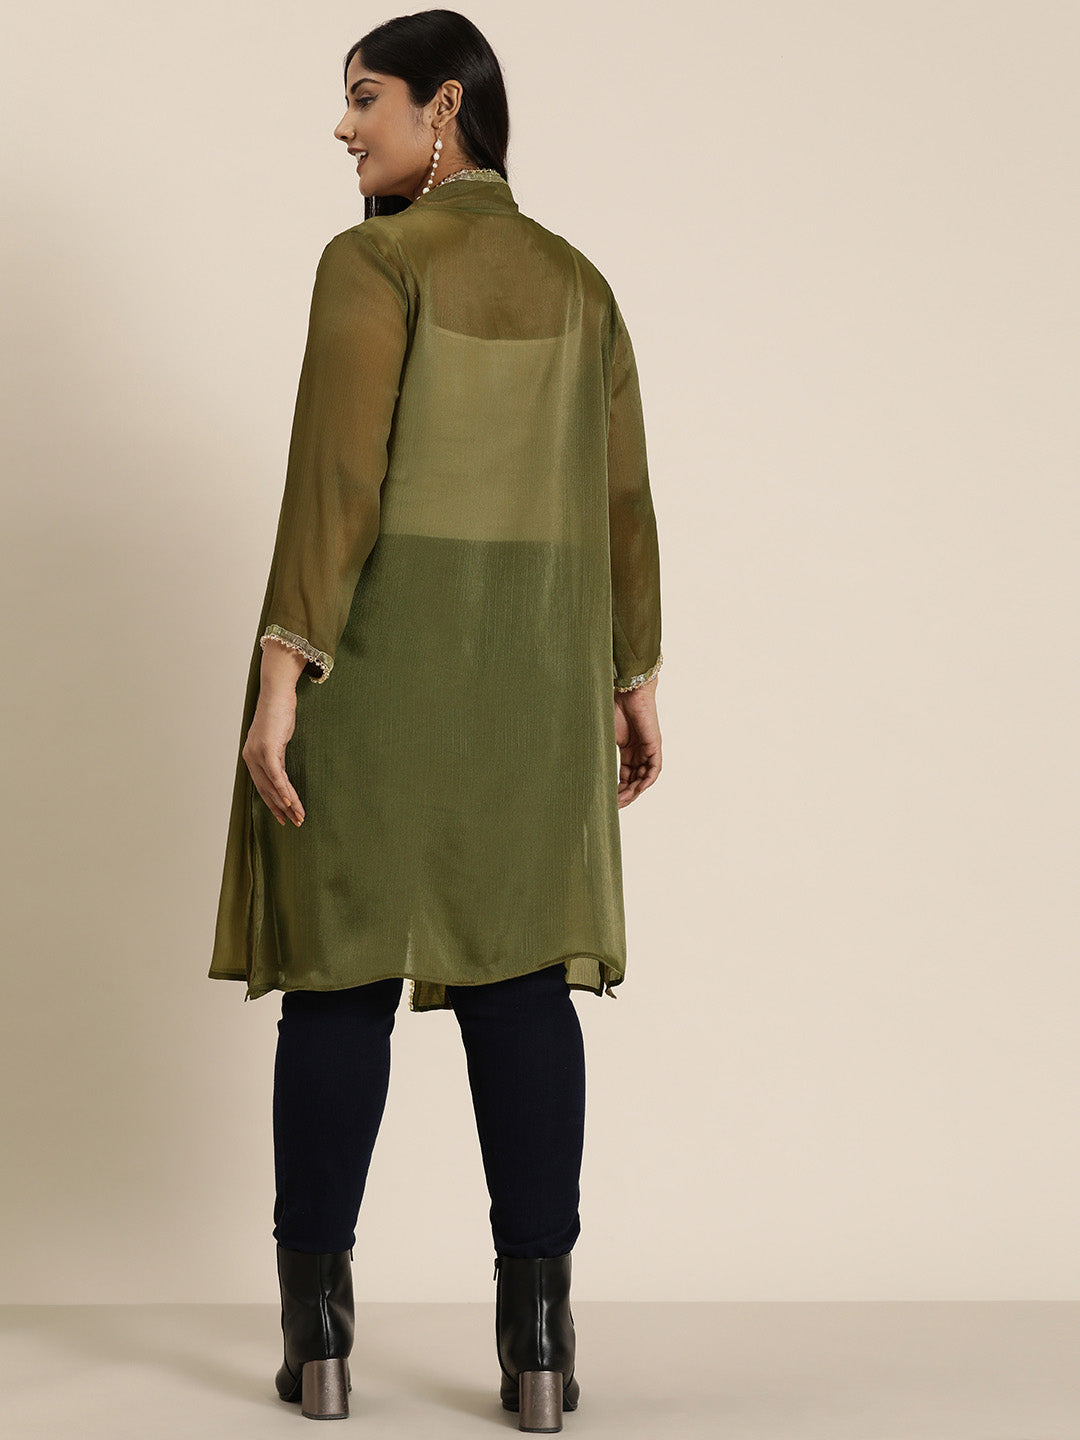 Olive georgette with gold shimmer party shrug